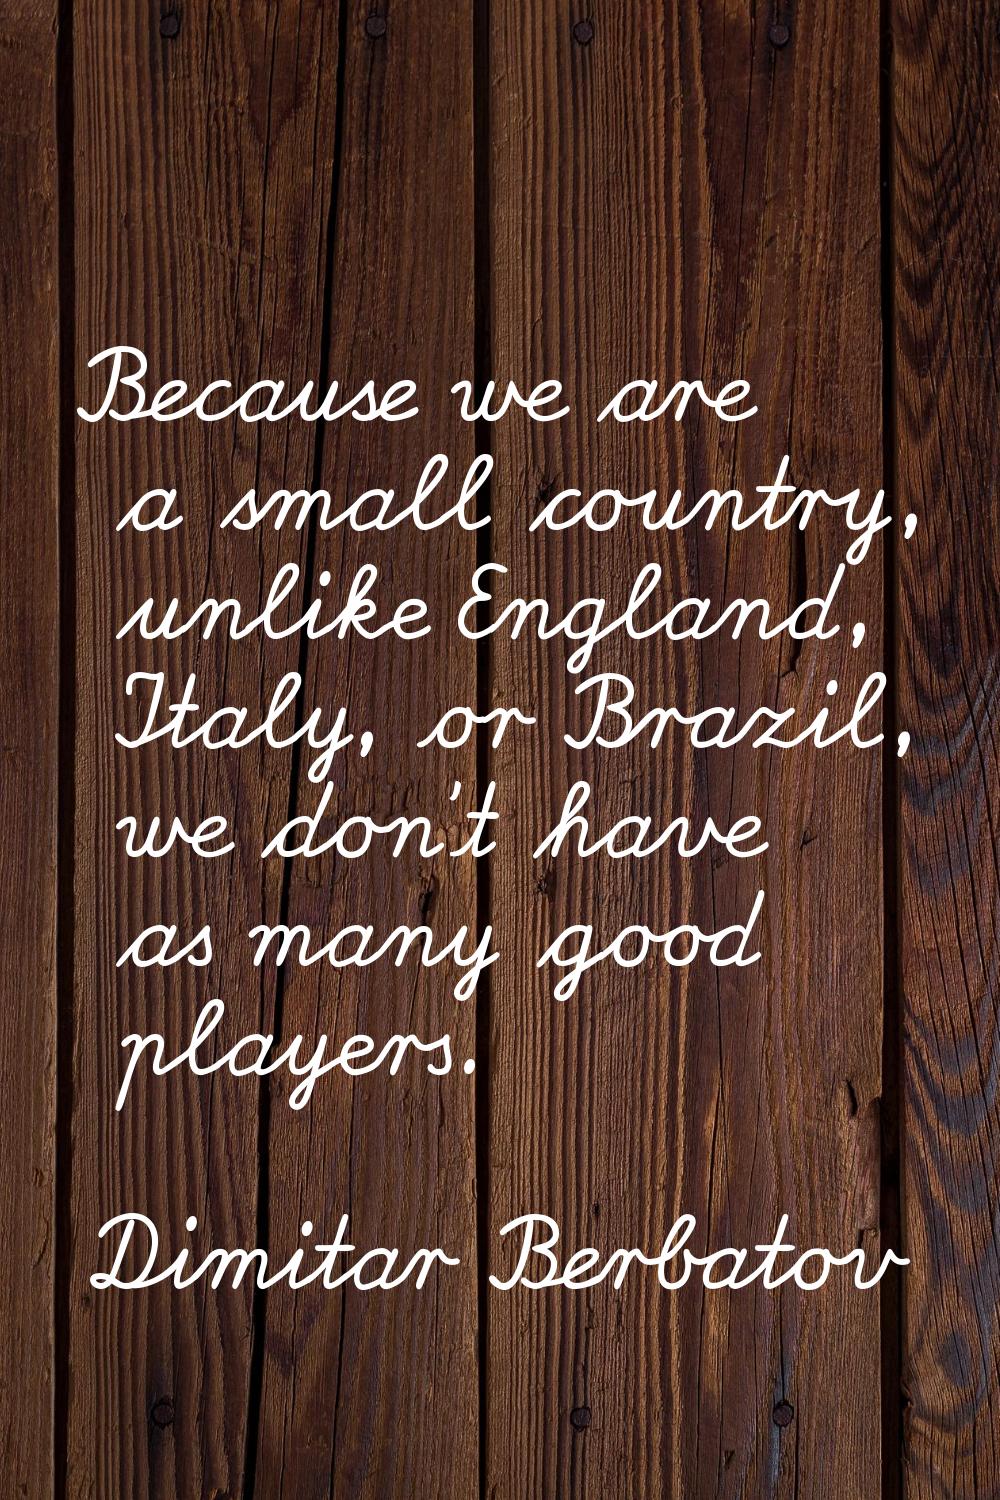 Because we are a small country, unlike England, Italy, or Brazil, we don't have as many good player